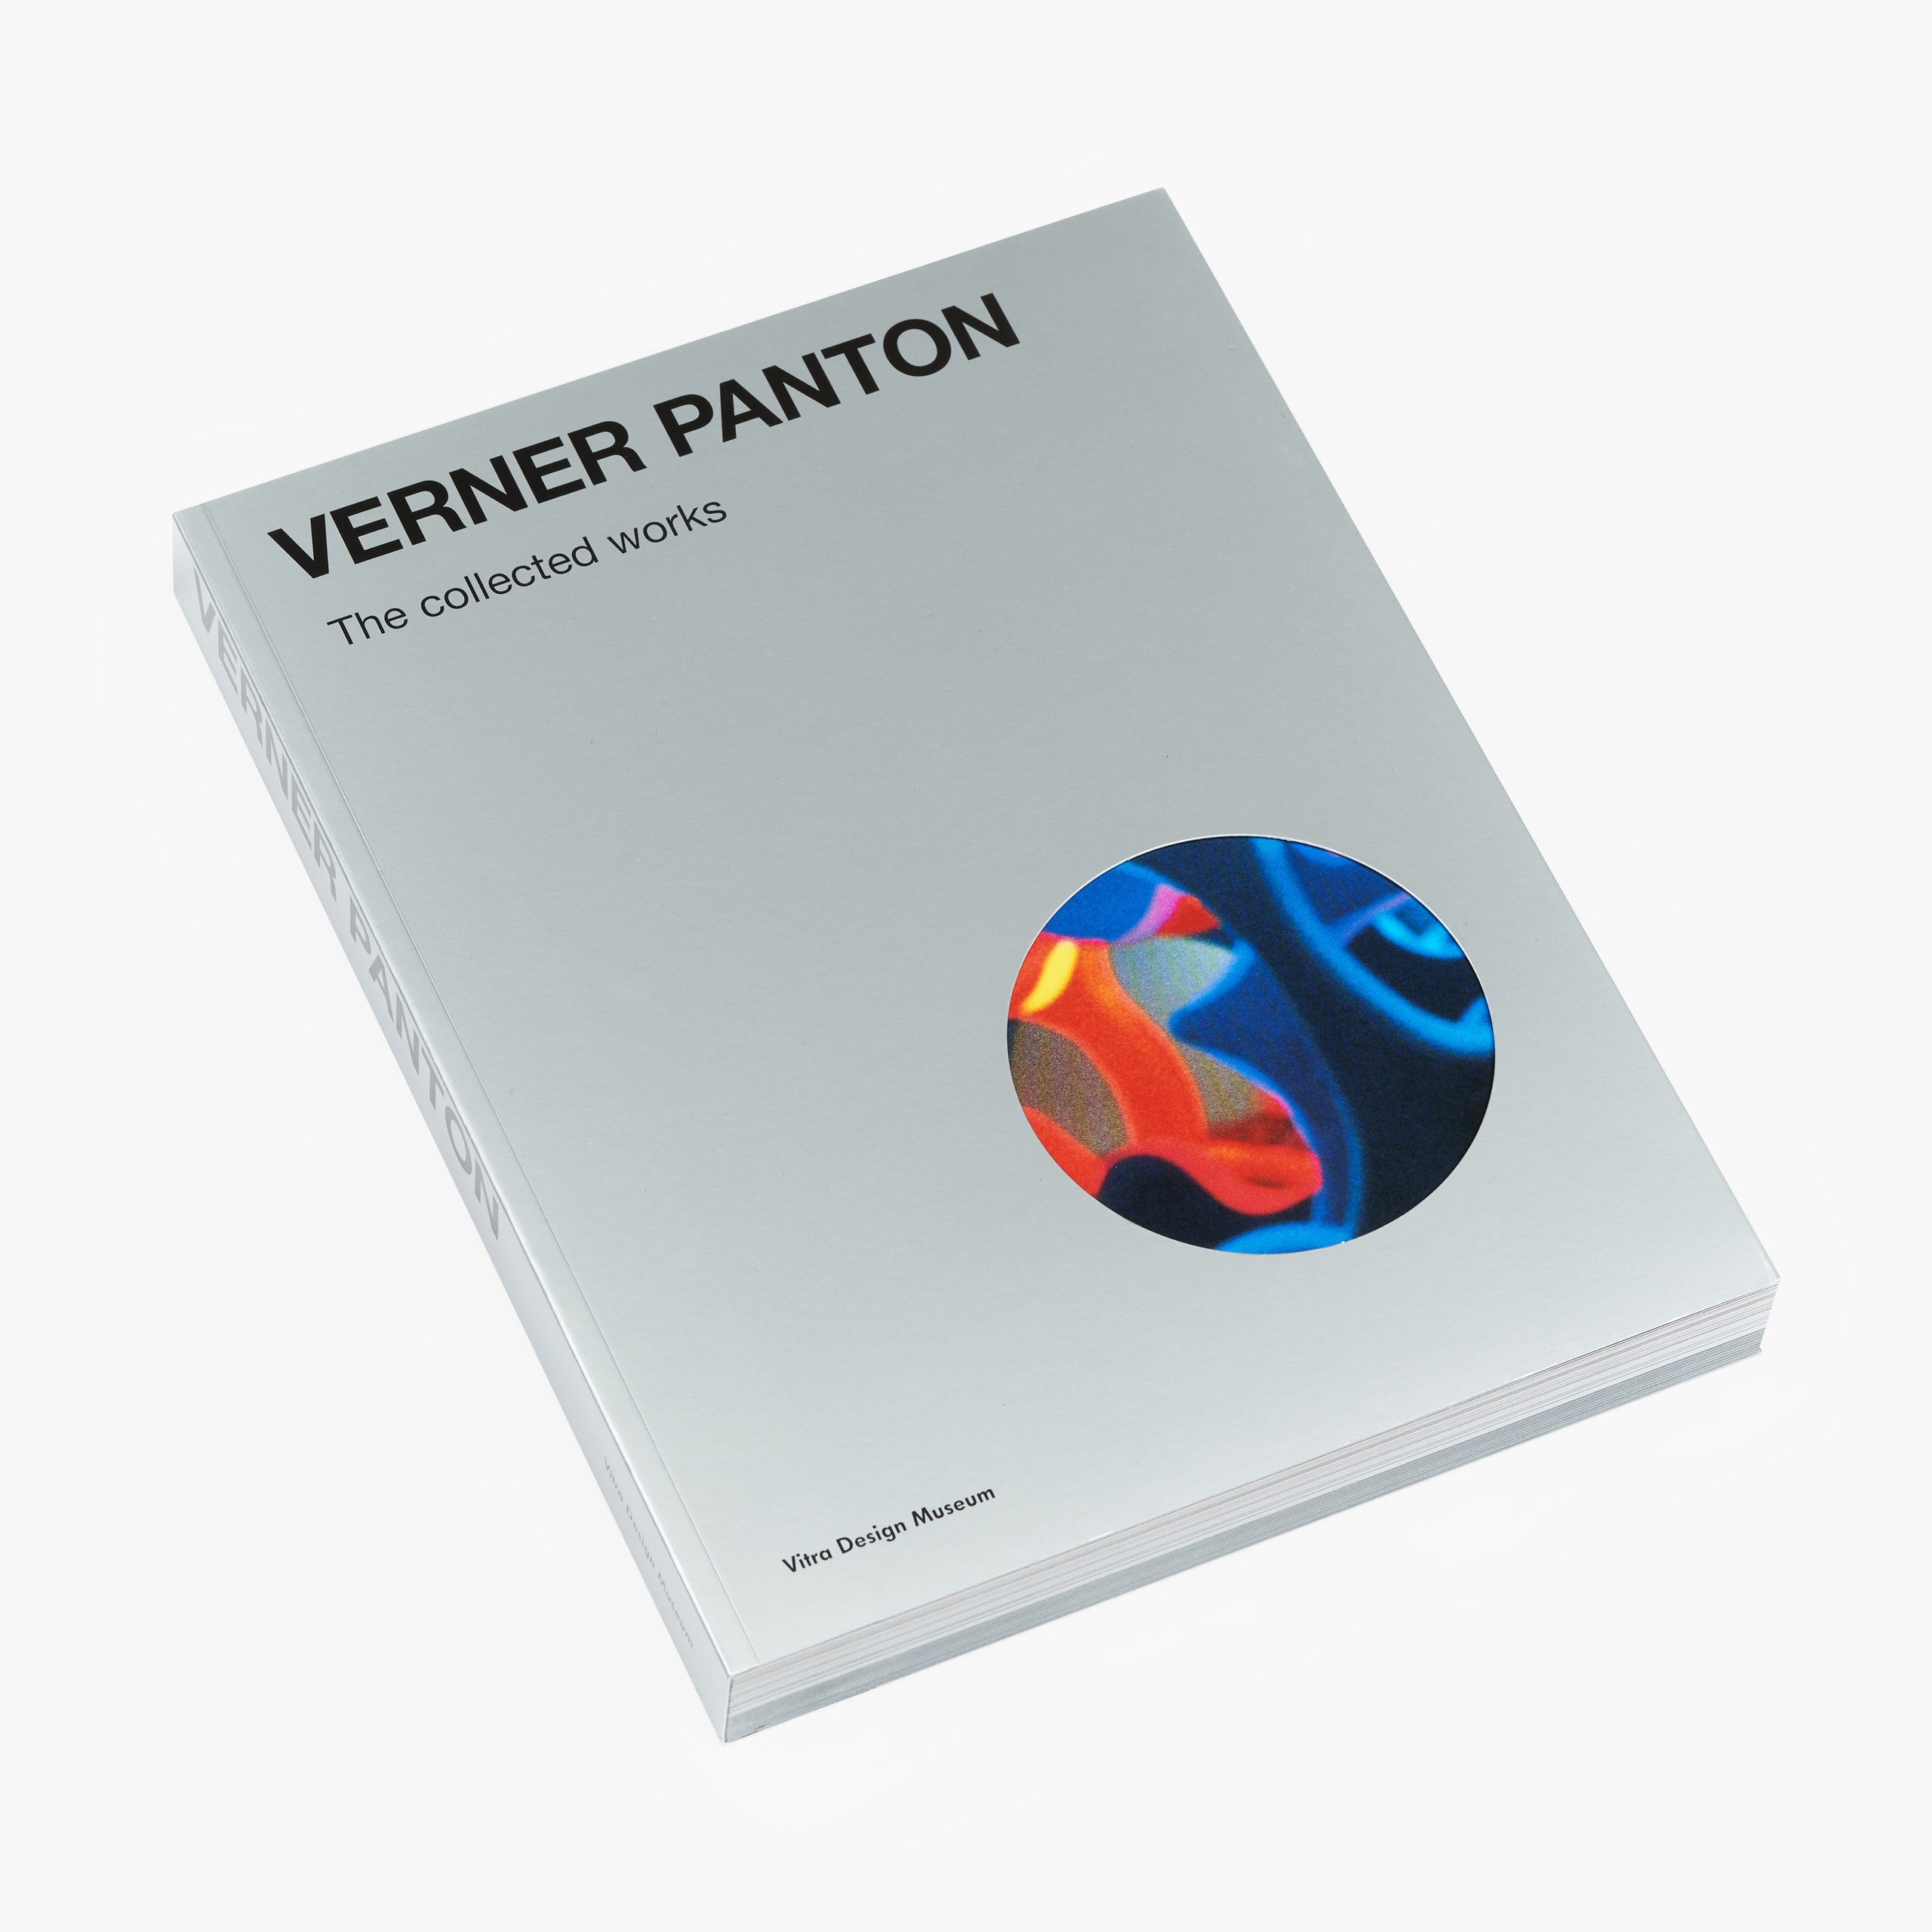 Verner Panton The Collected Works